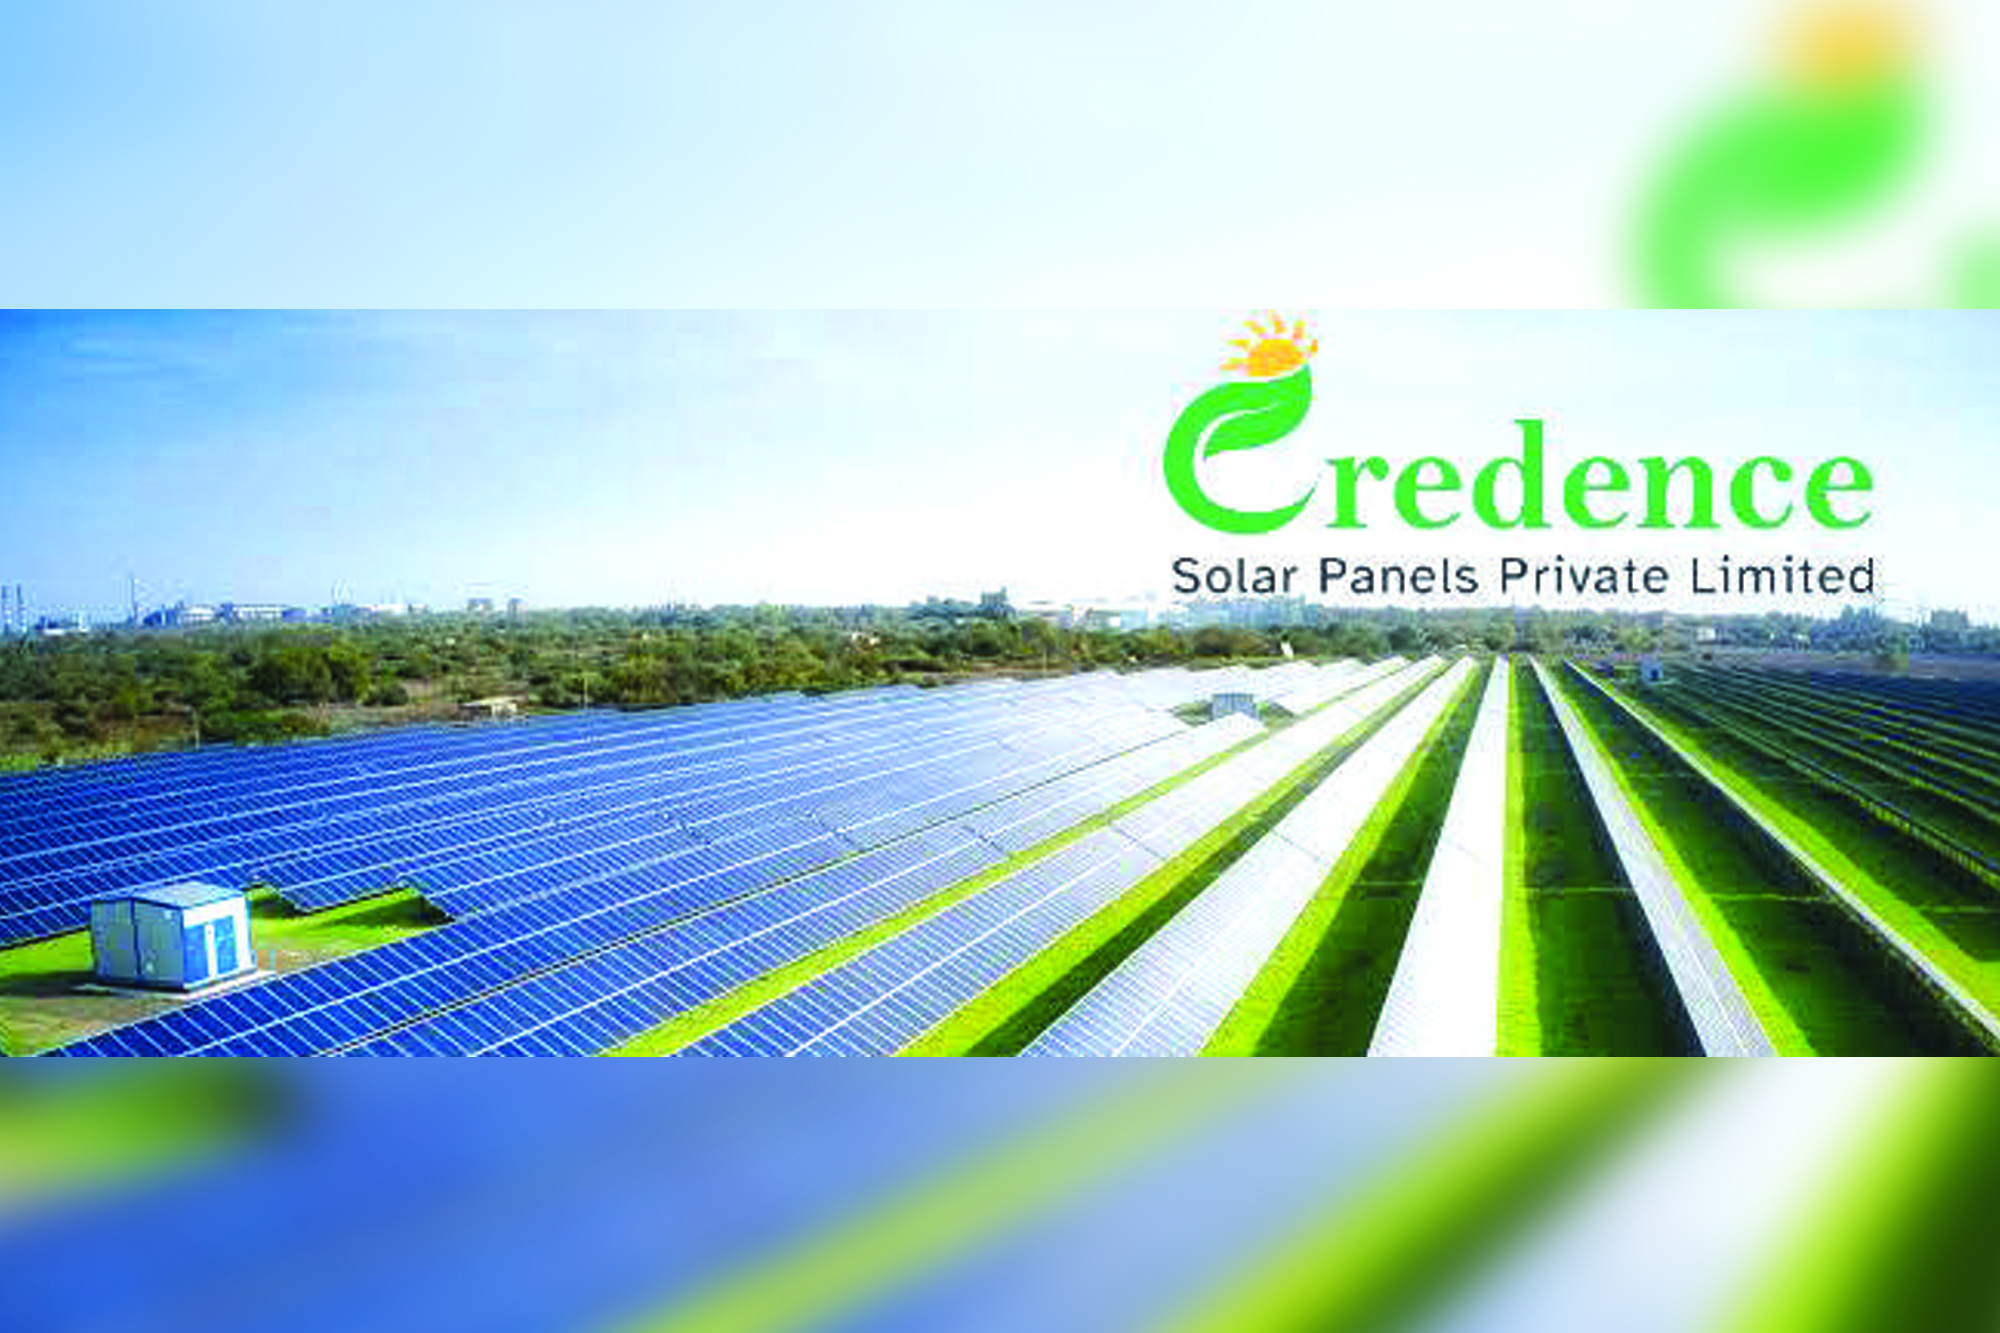 Credence Solar Panels achieves BIS certification for high-capacity modules